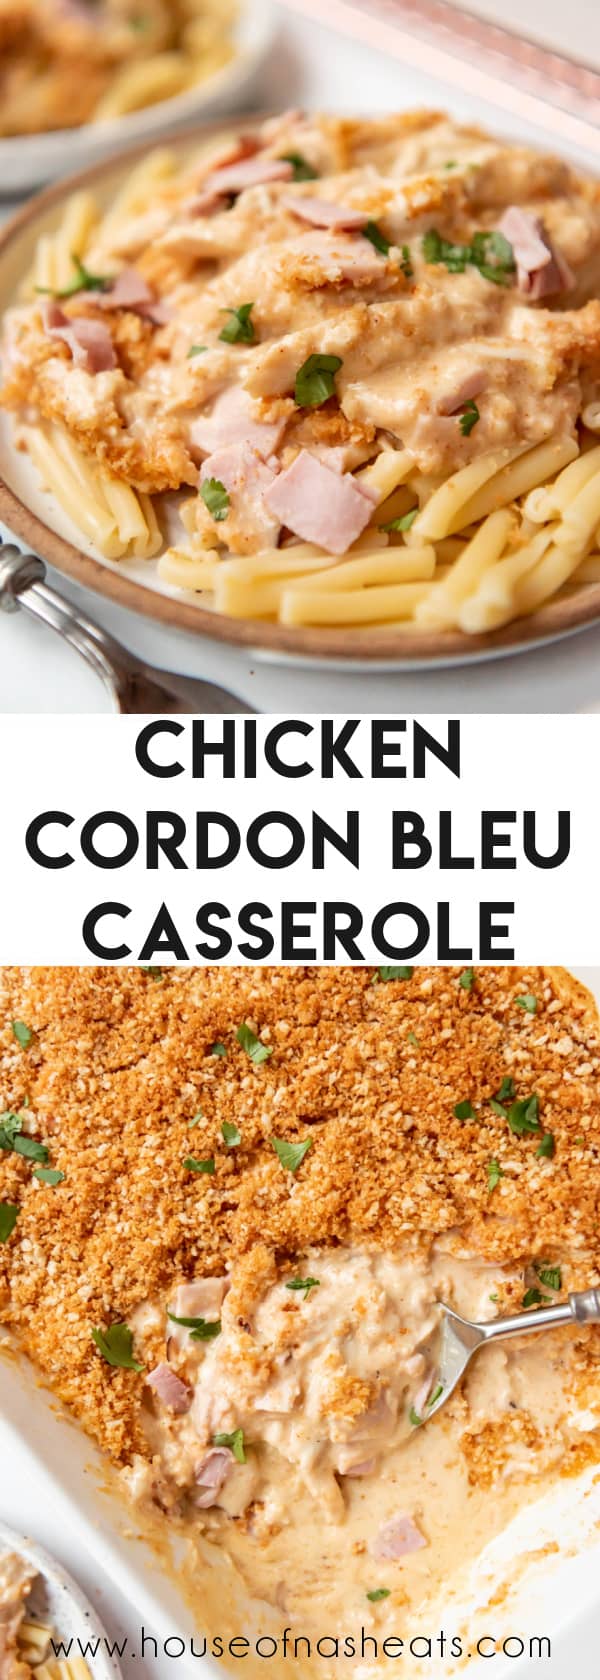 A collage of images of chicken cordon bleu casserole with text overlay.